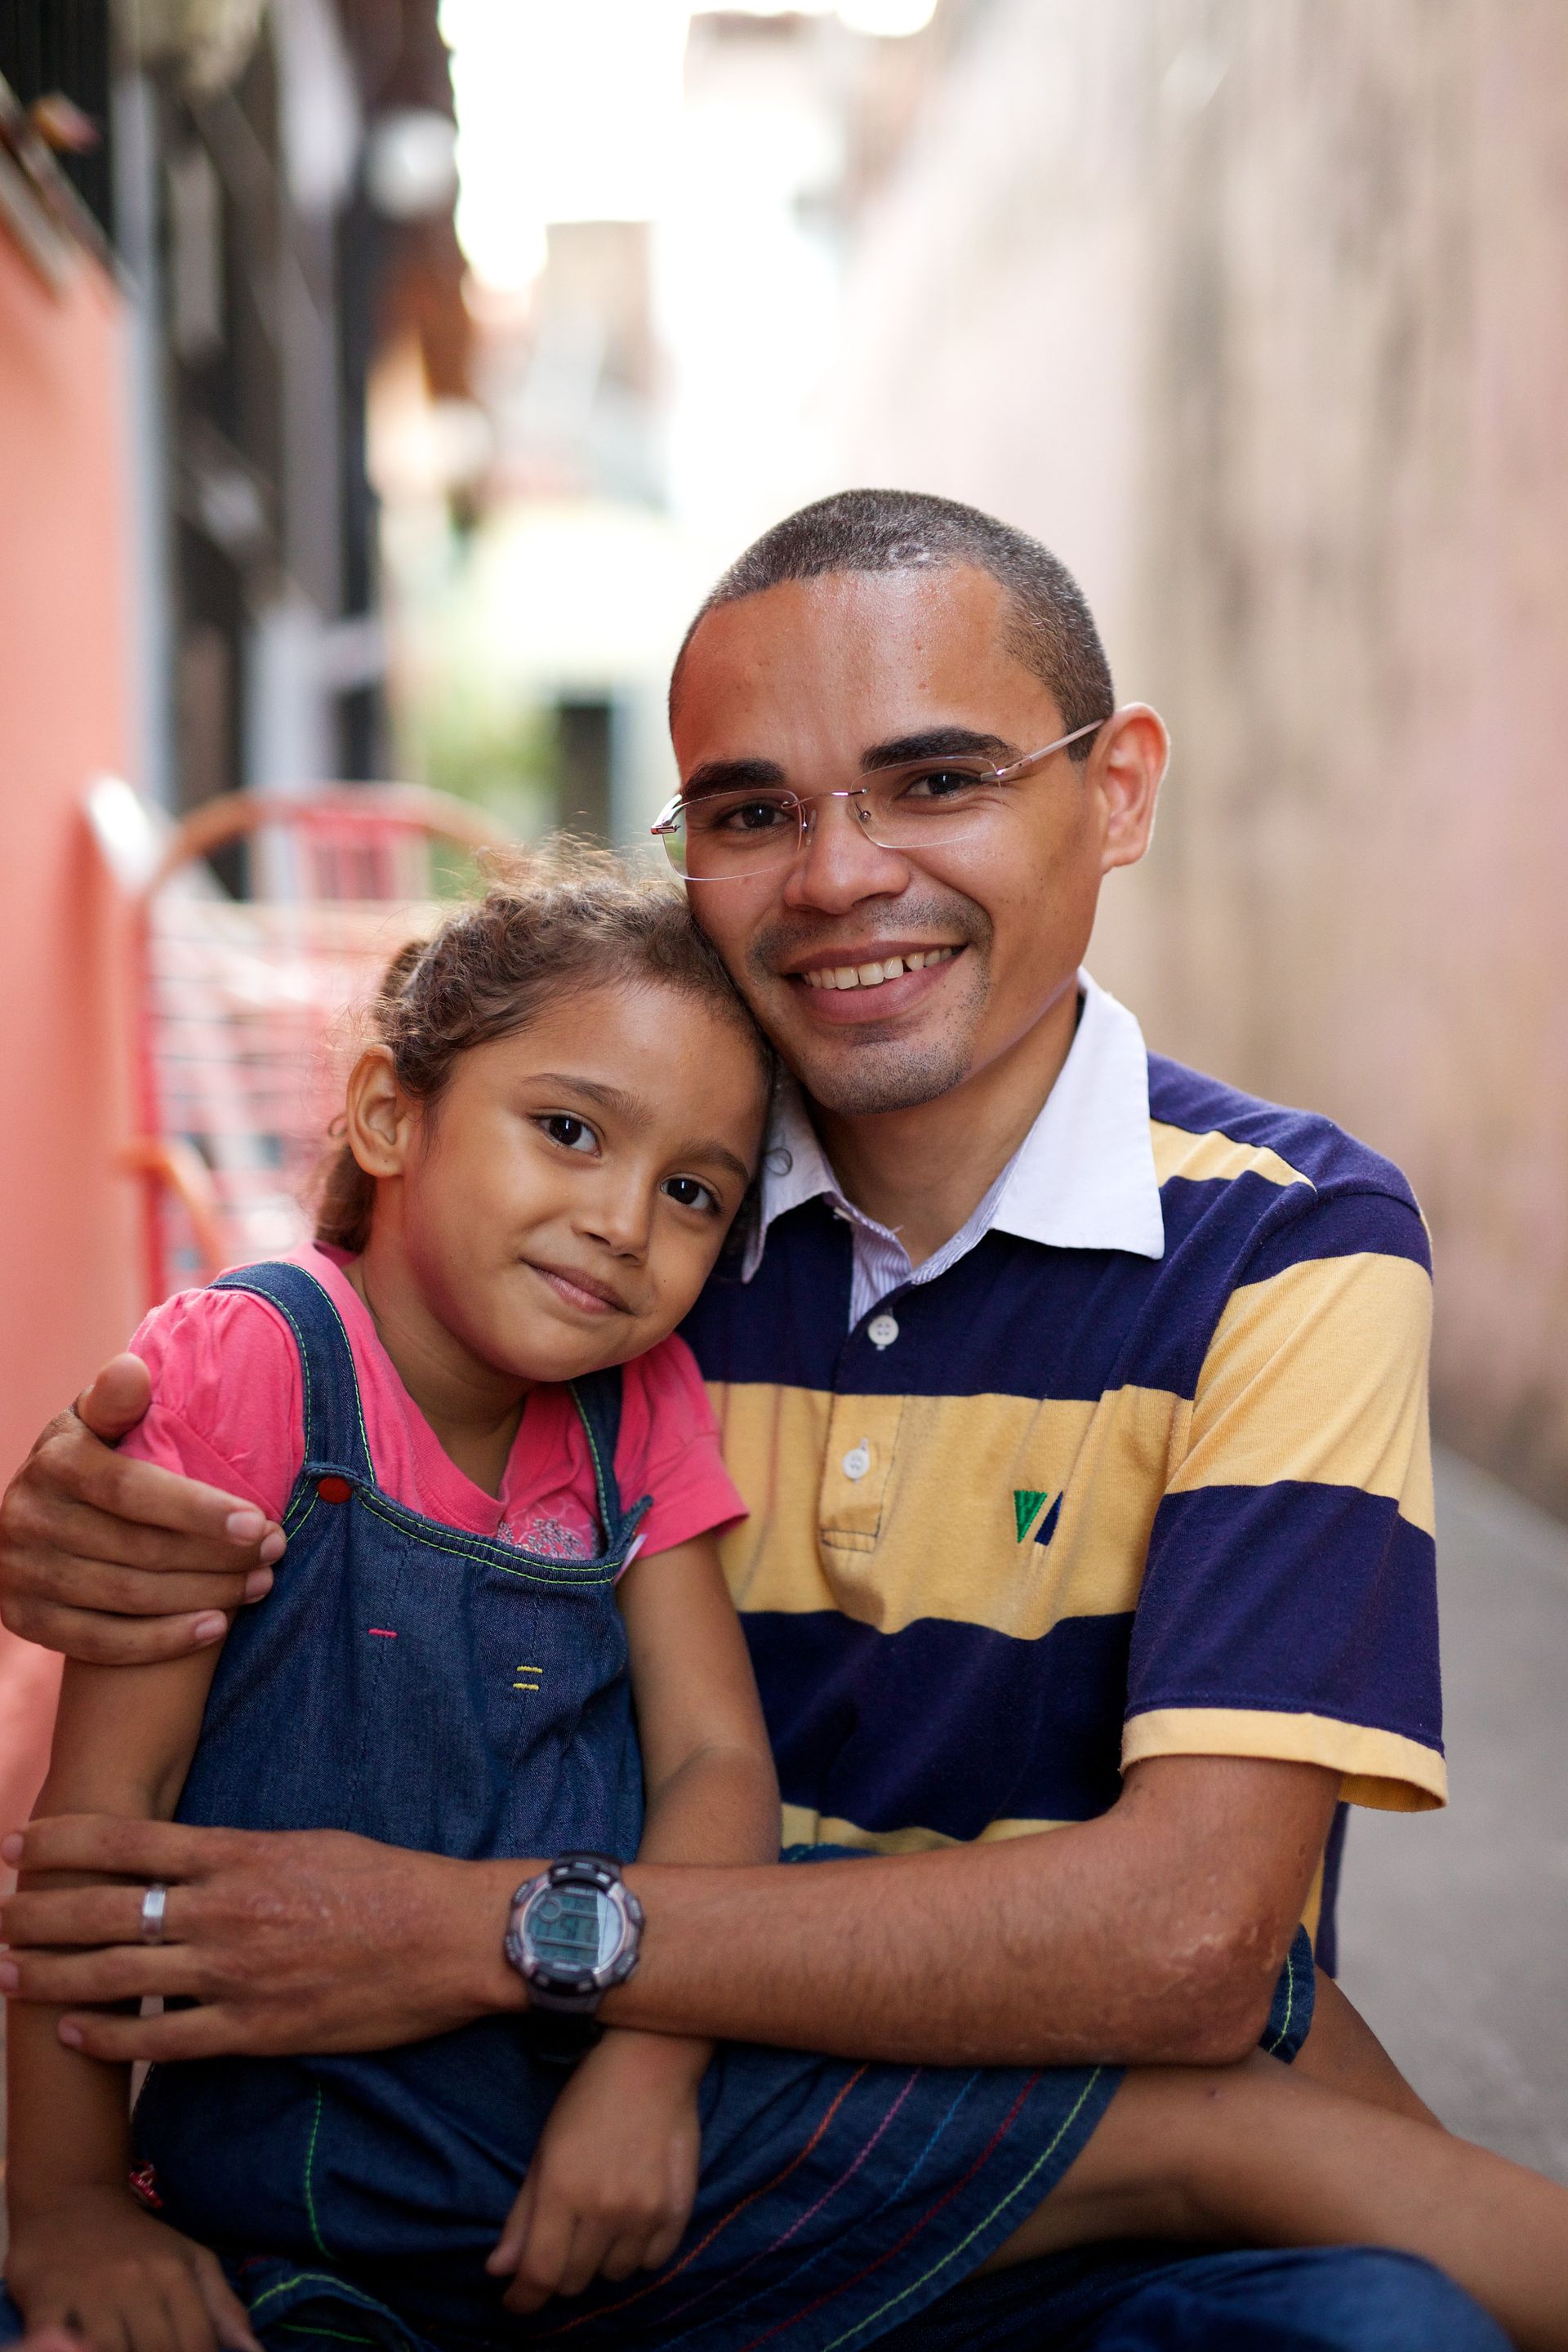 A father poses with his young daughter outside.